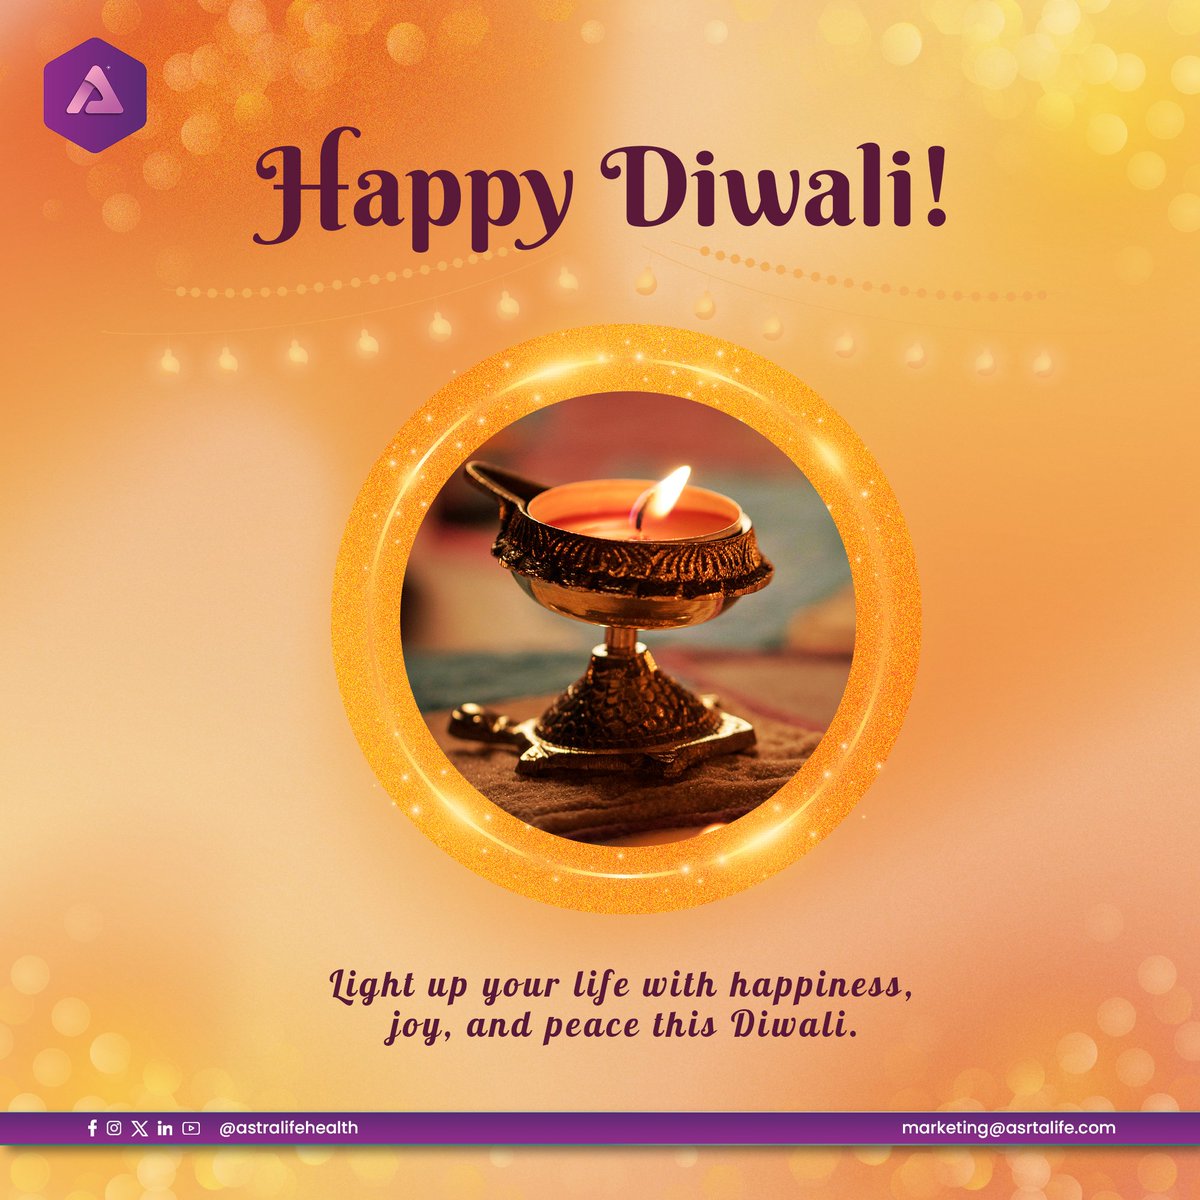 Bringing light and health to every life this Diwali!

#astralife #astralifehealth #astralifehealthcare #medicaleducation #healthcare #HealthcareInnovation #HealthcareUnfiltered